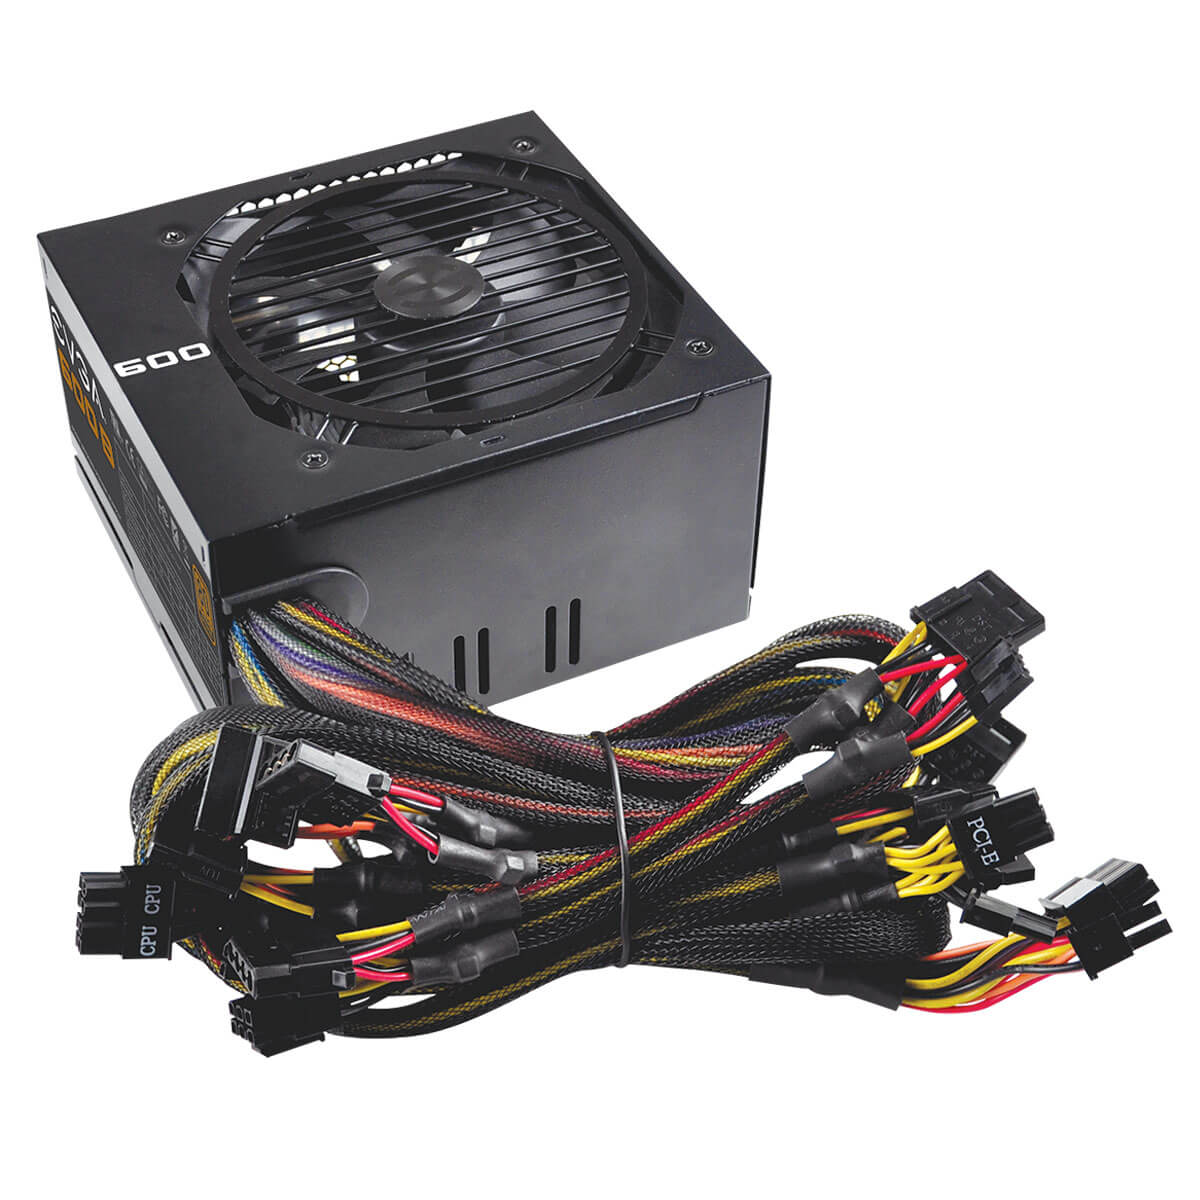 How To Determine What Wattage PSU You Need